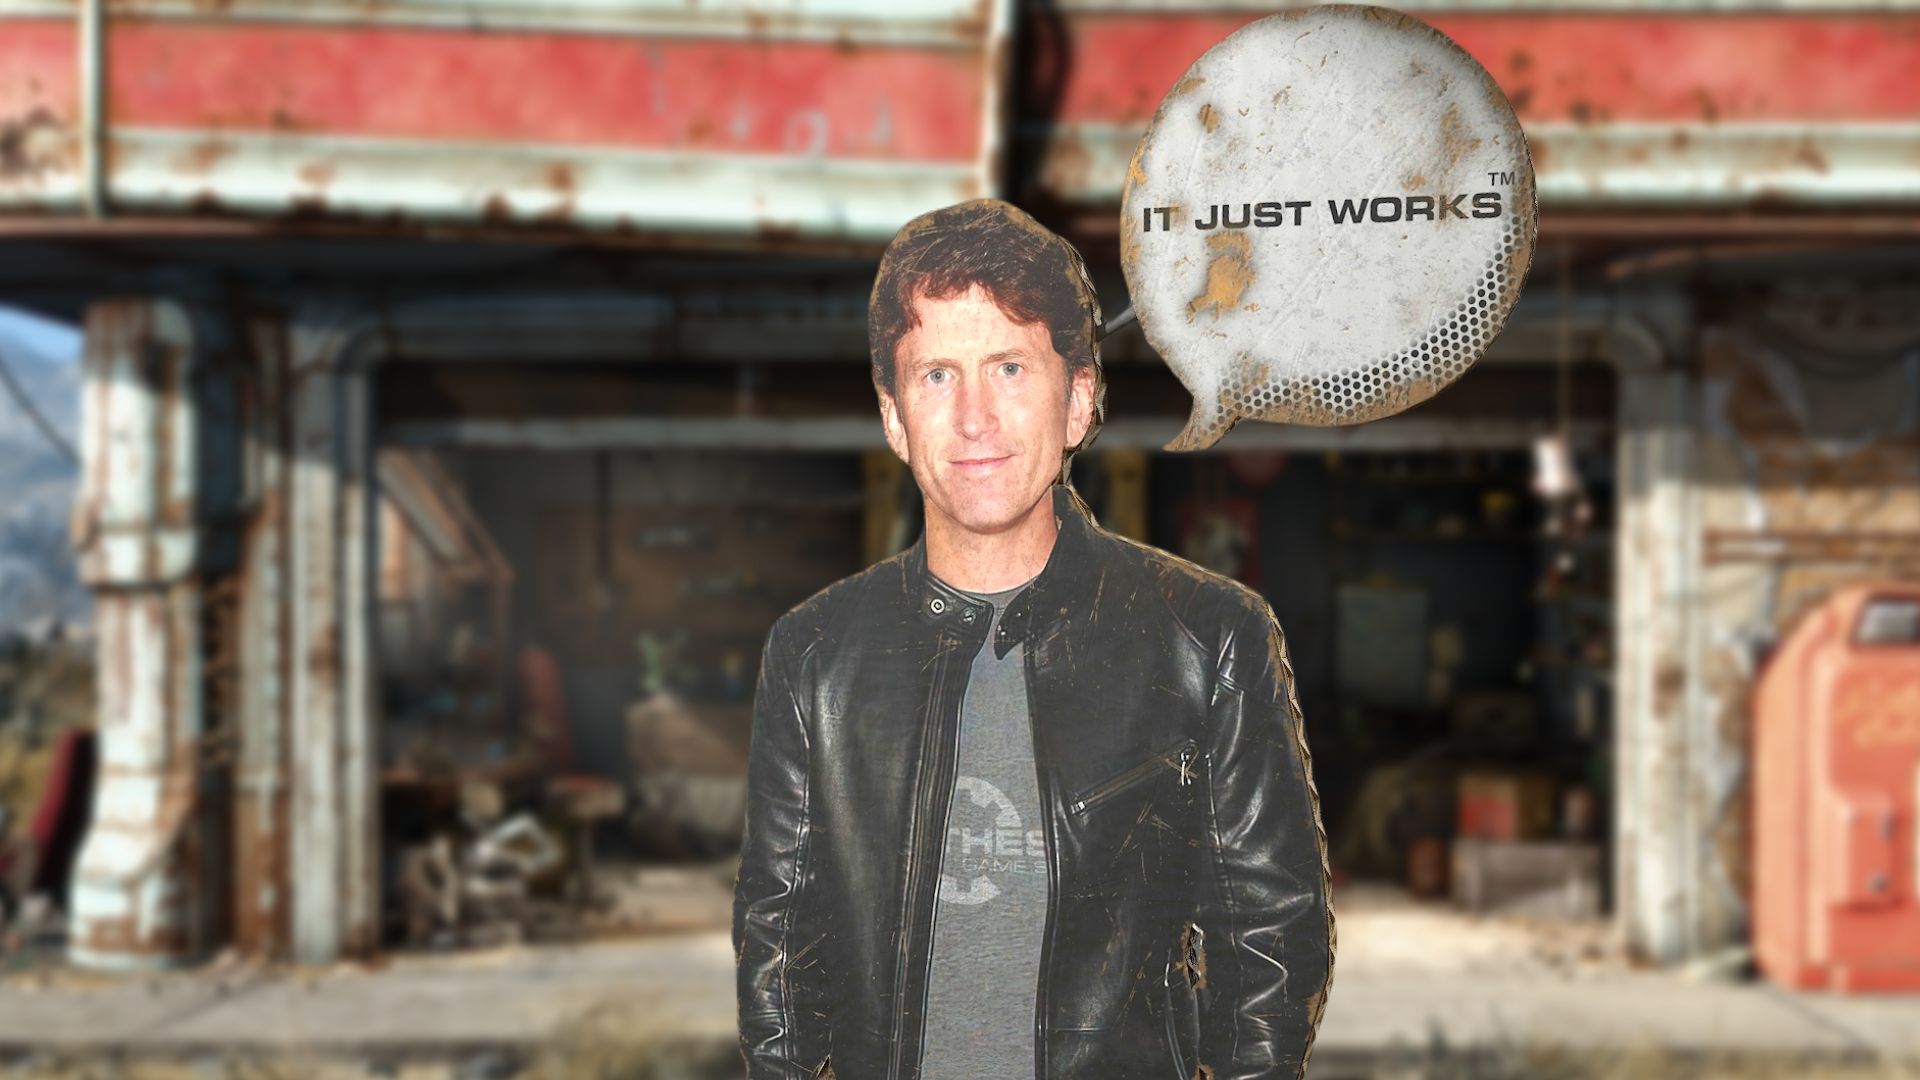 Fallout 4 mod brings cardboard Todd Howard to your home